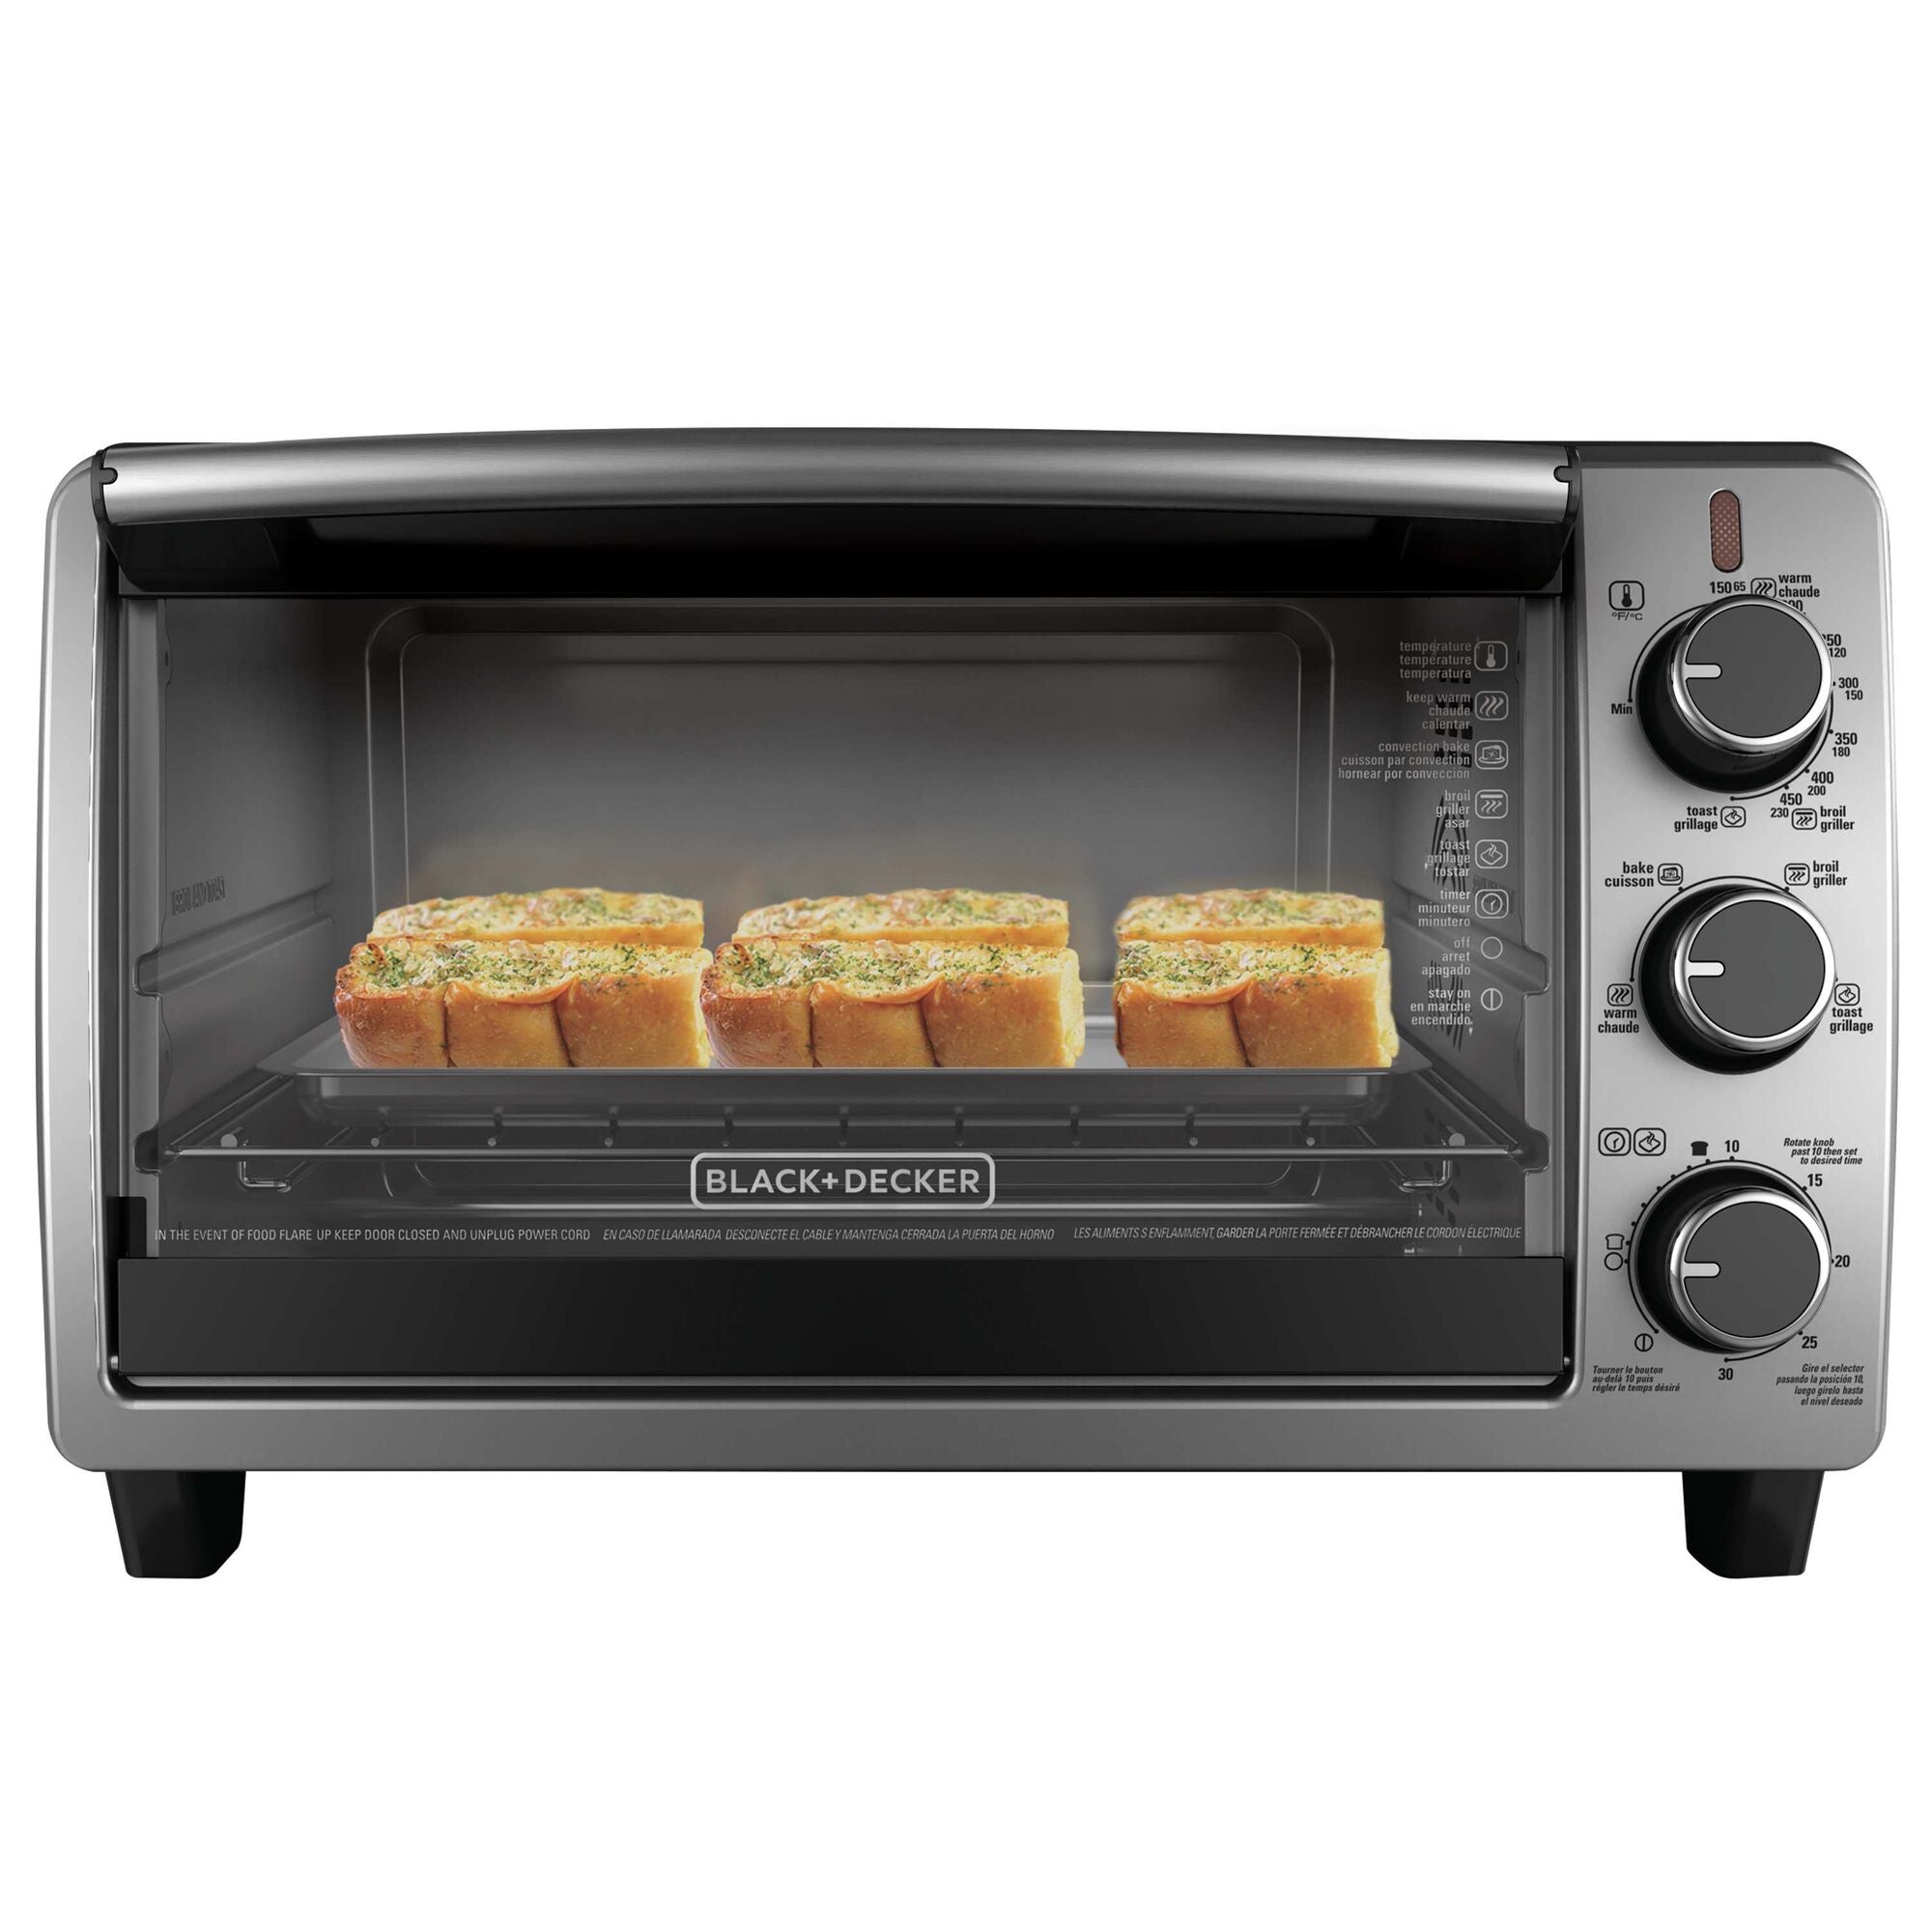 BLACK & DECKER 6-Slice Convection Toaster Oven at